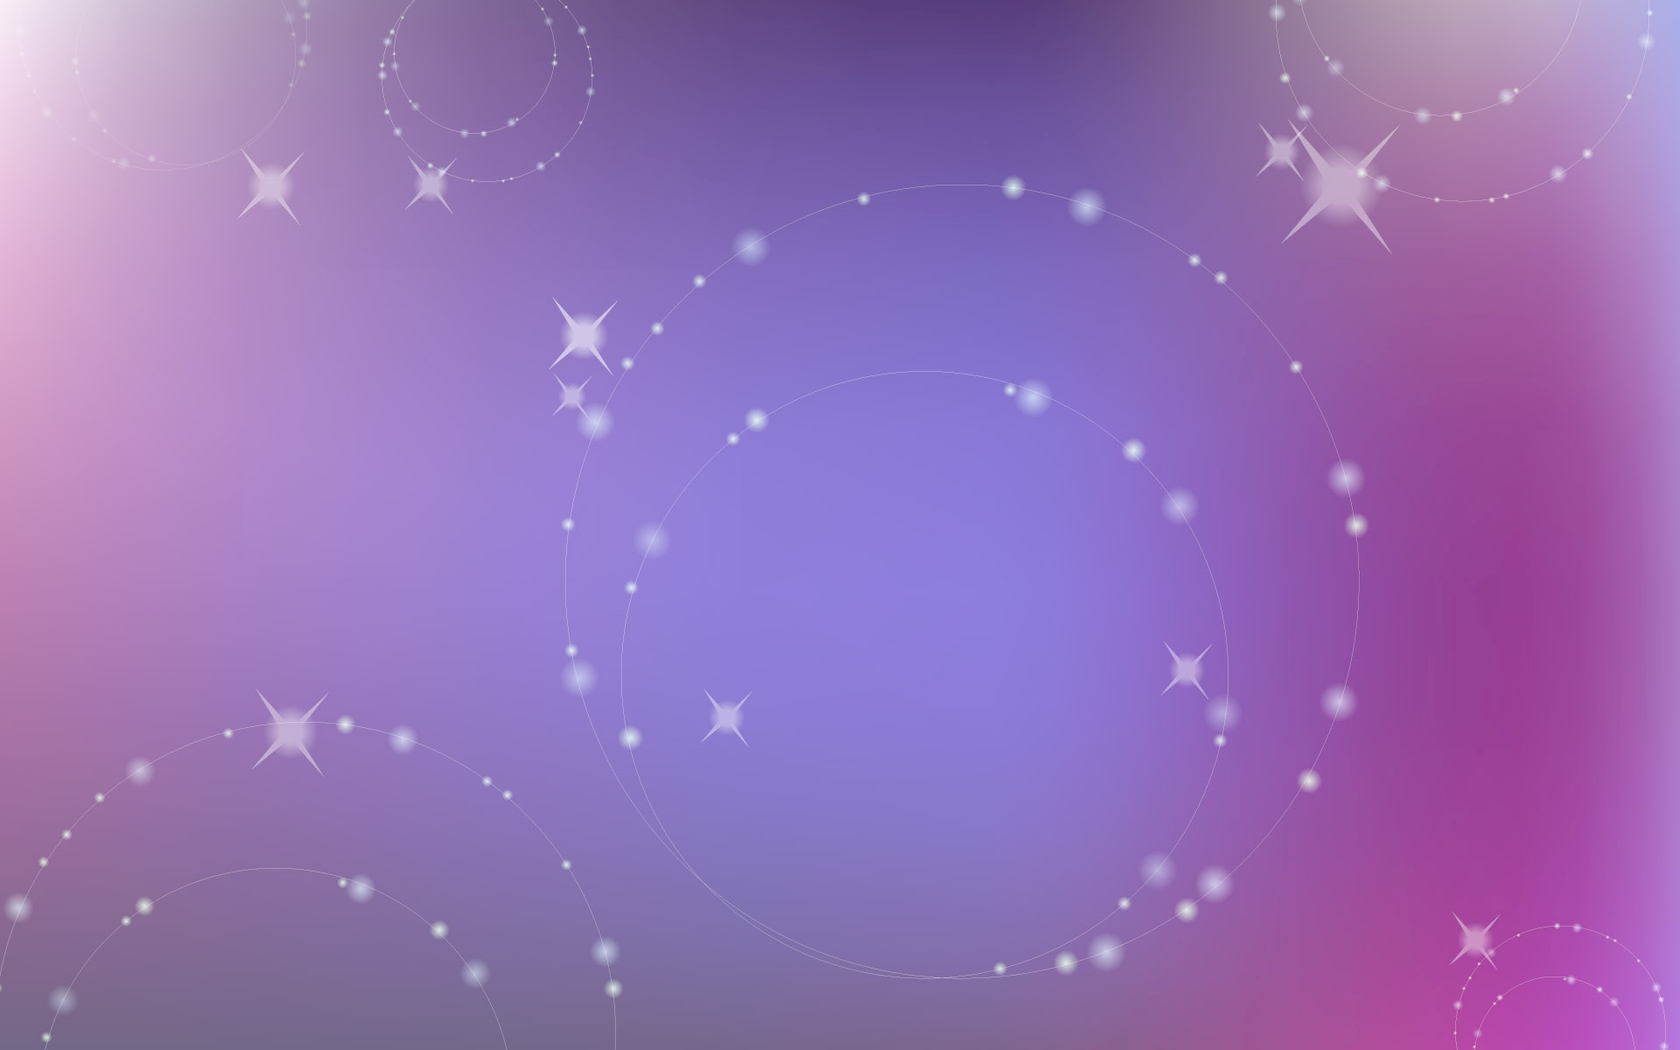 White Sparkly Dots On A Purple Background Wallpaper